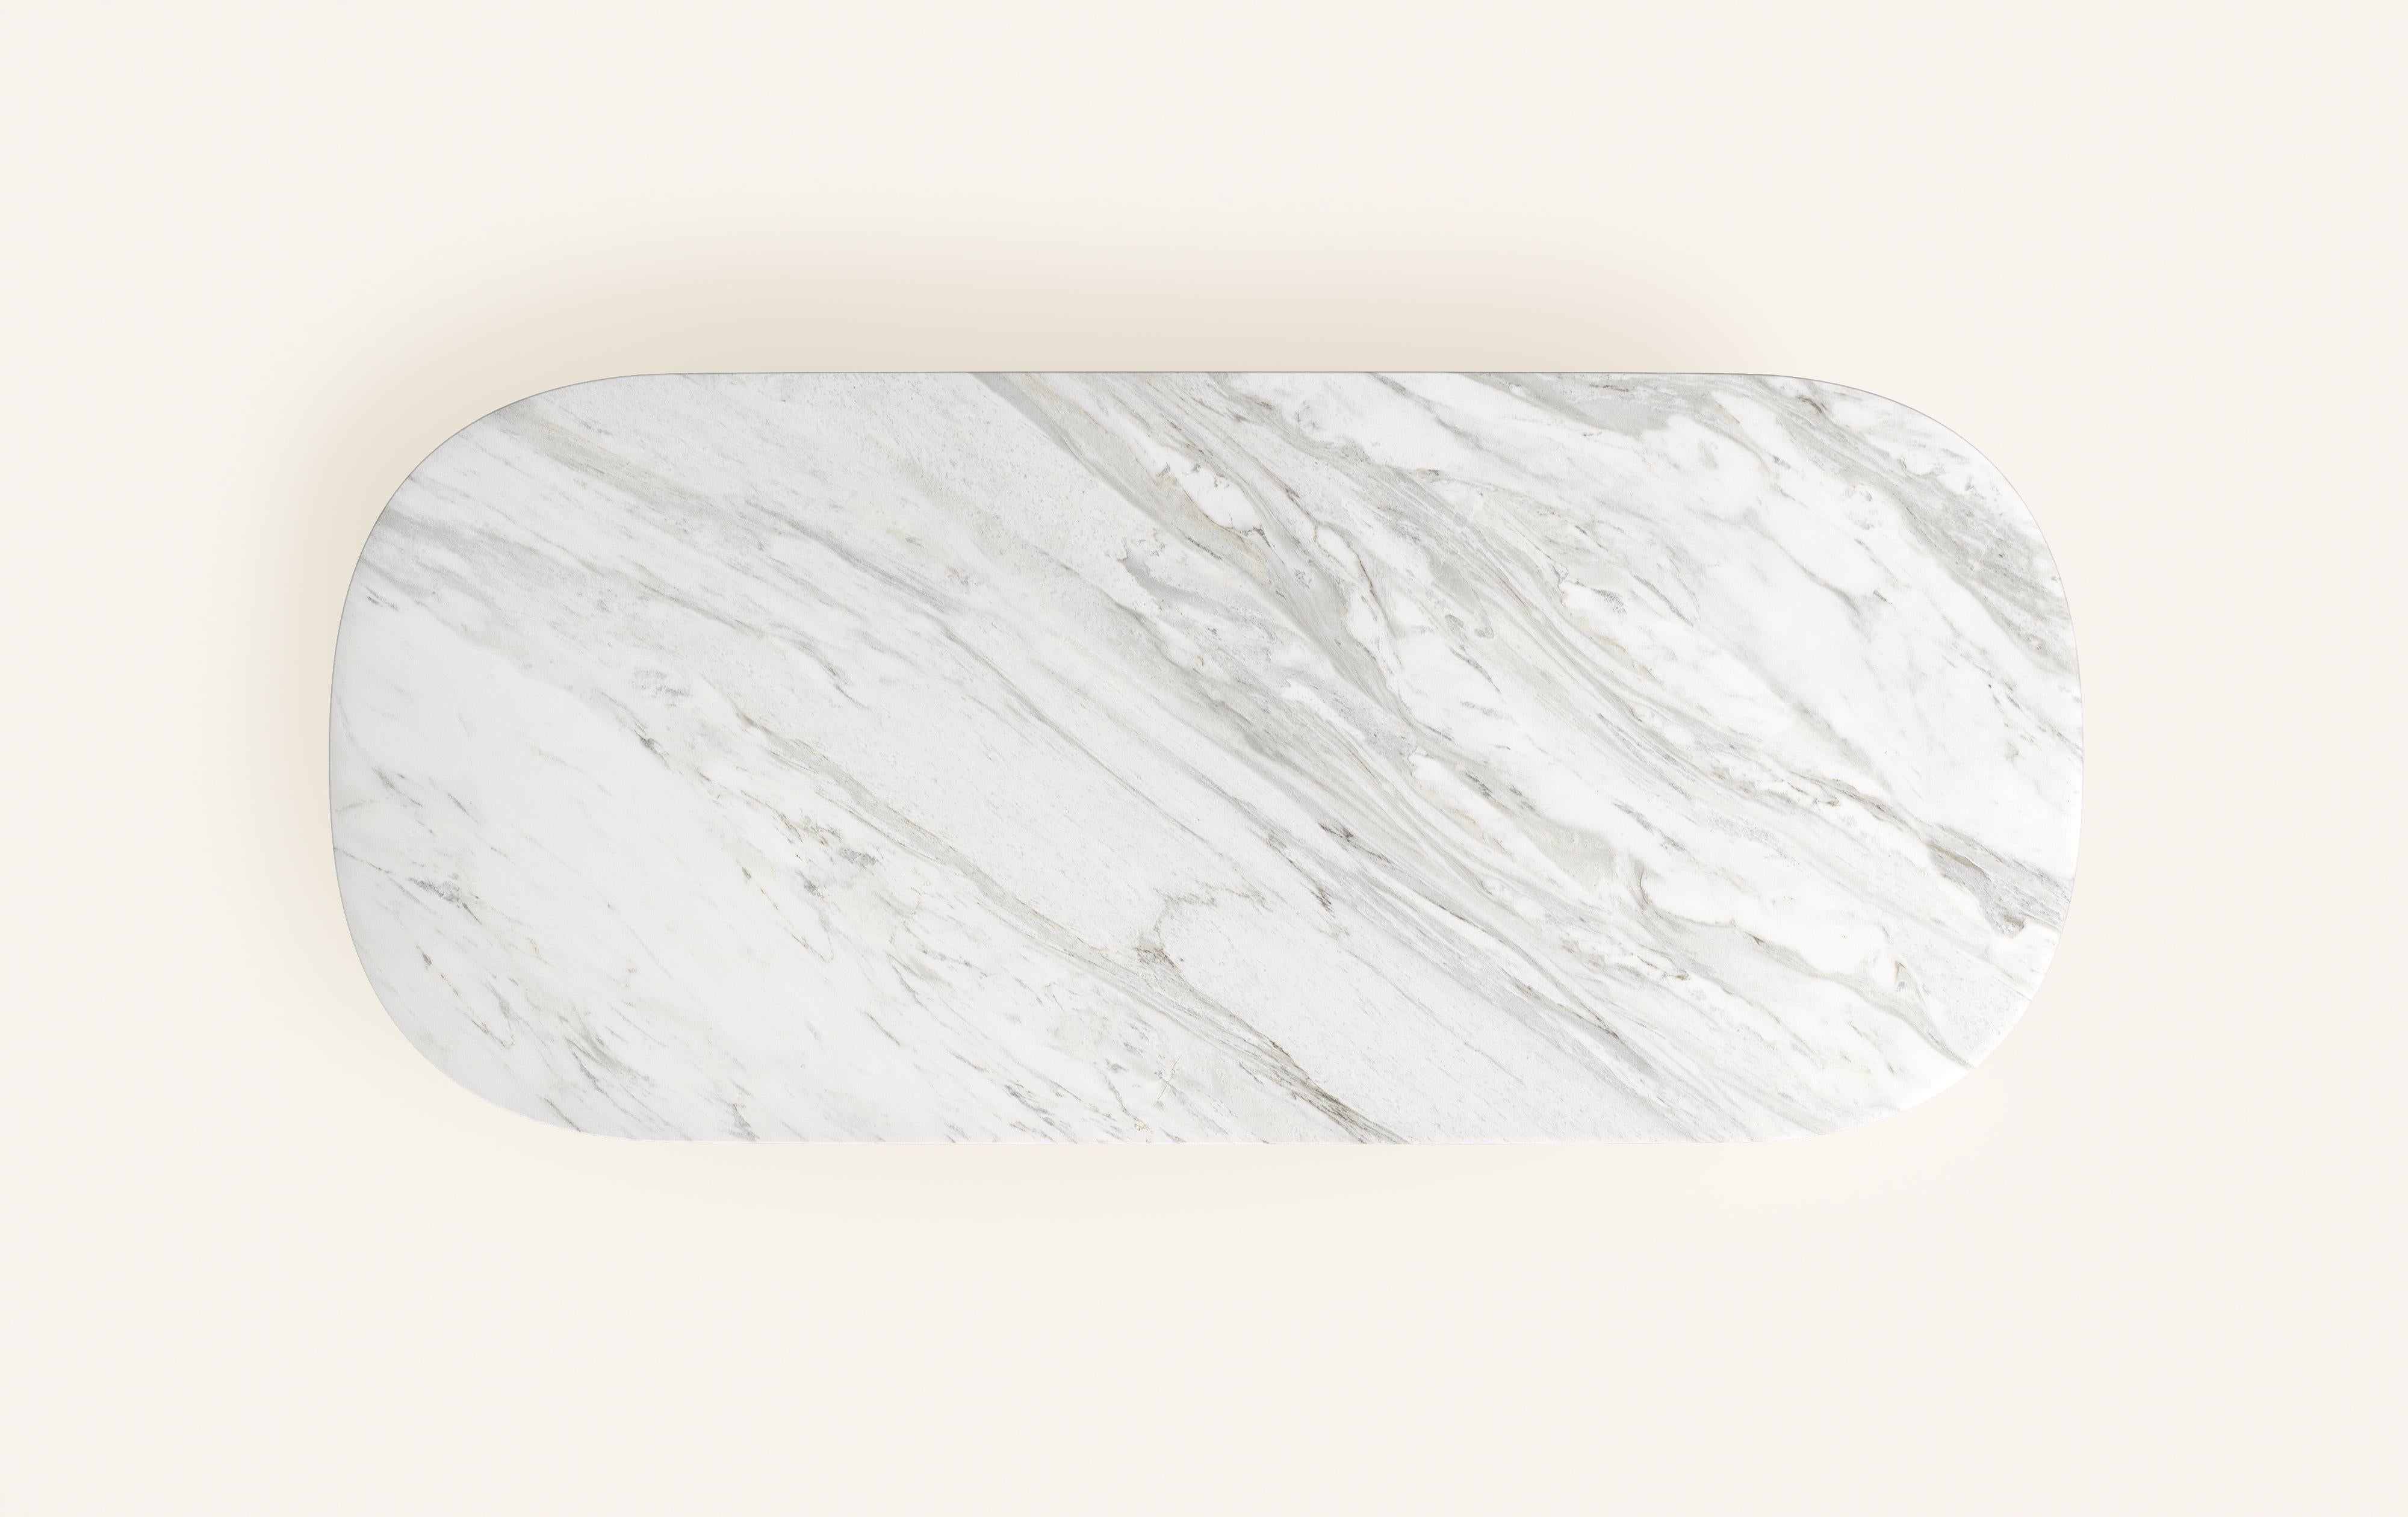 FORM(LA) Cono Oval Dining Table 96”L x 42”W x 30”H Volakas White Marble In New Condition For Sale In Los Angeles, CA